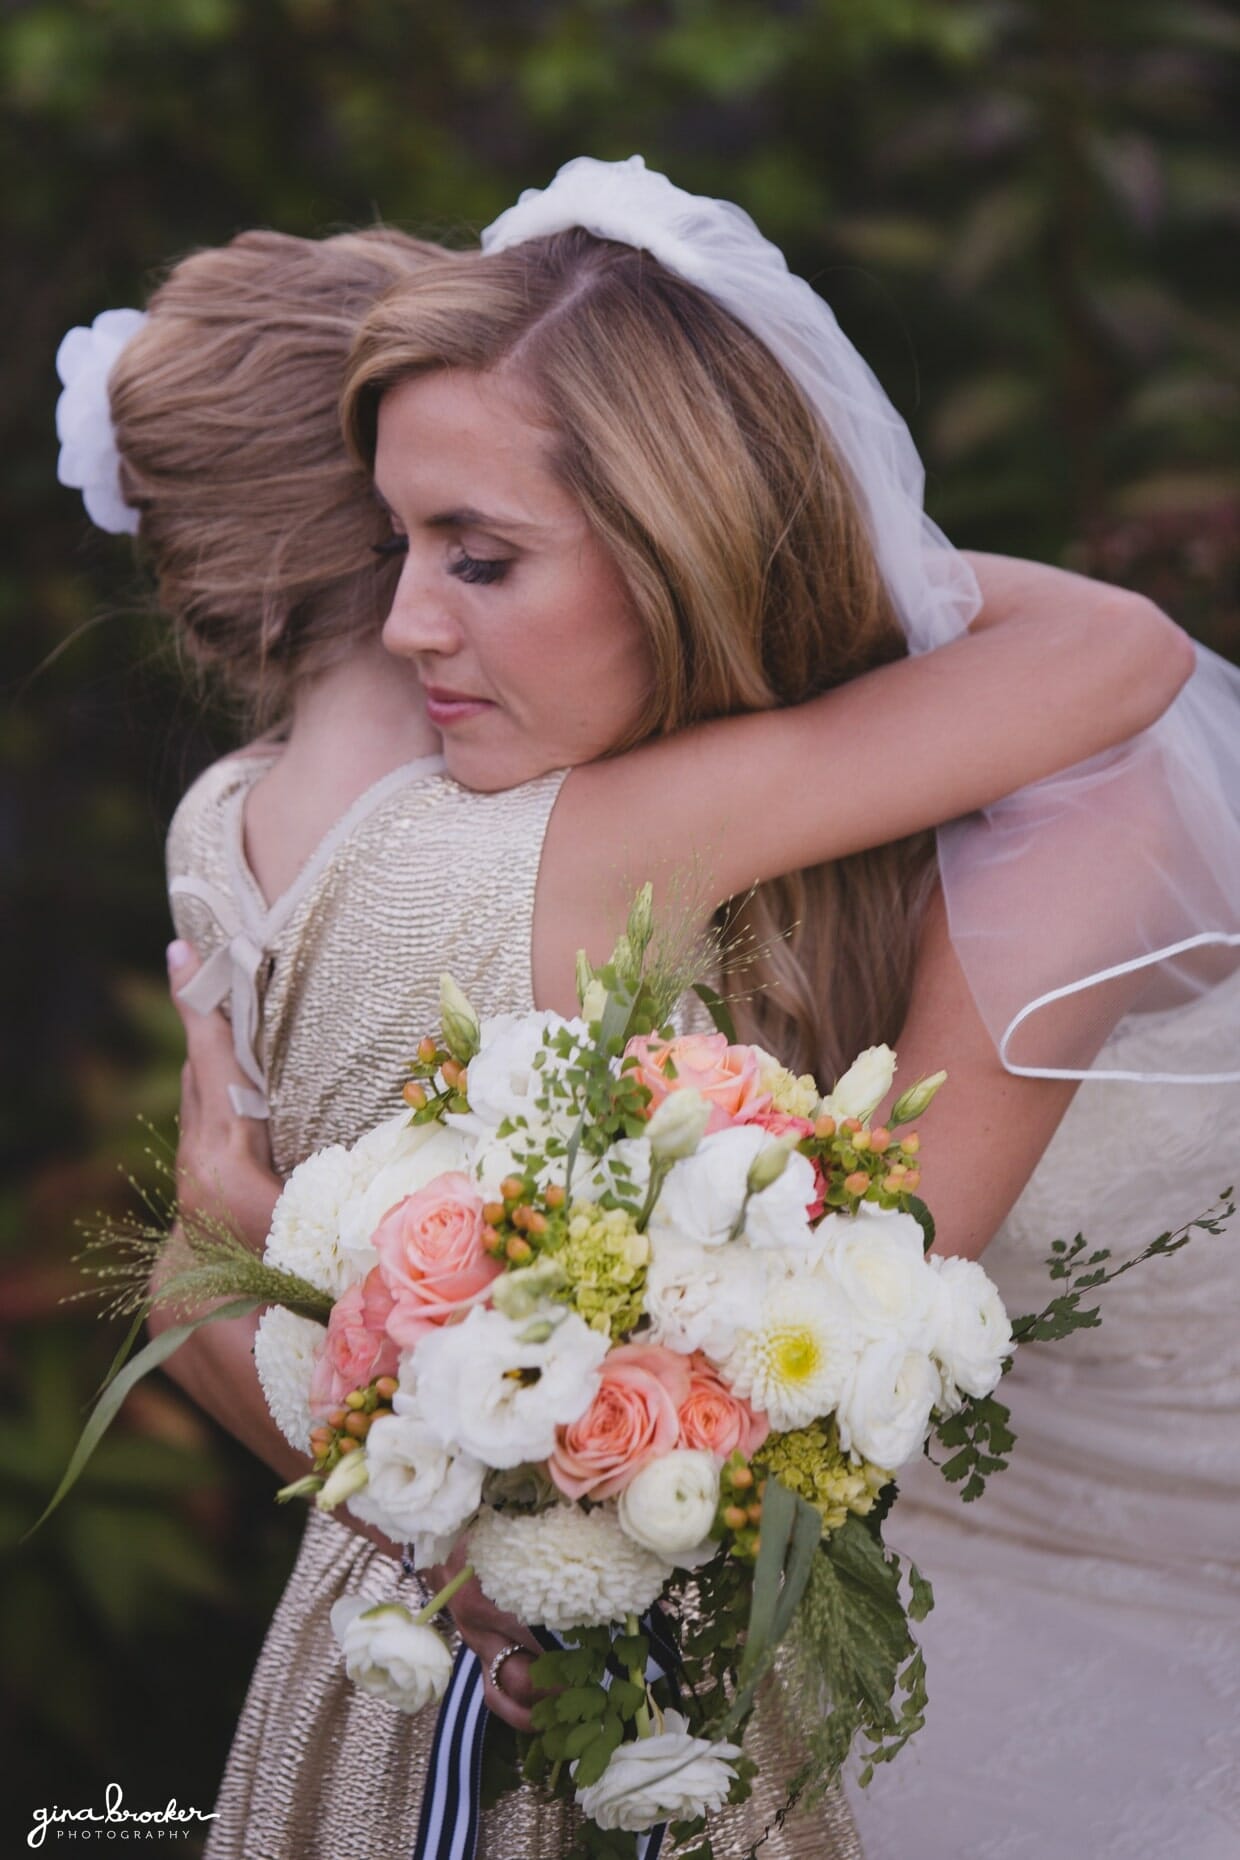 A bride hugs her flower girl moments after her wedding ceremony at the Westmoor Club in Nantucket, Massachusetts